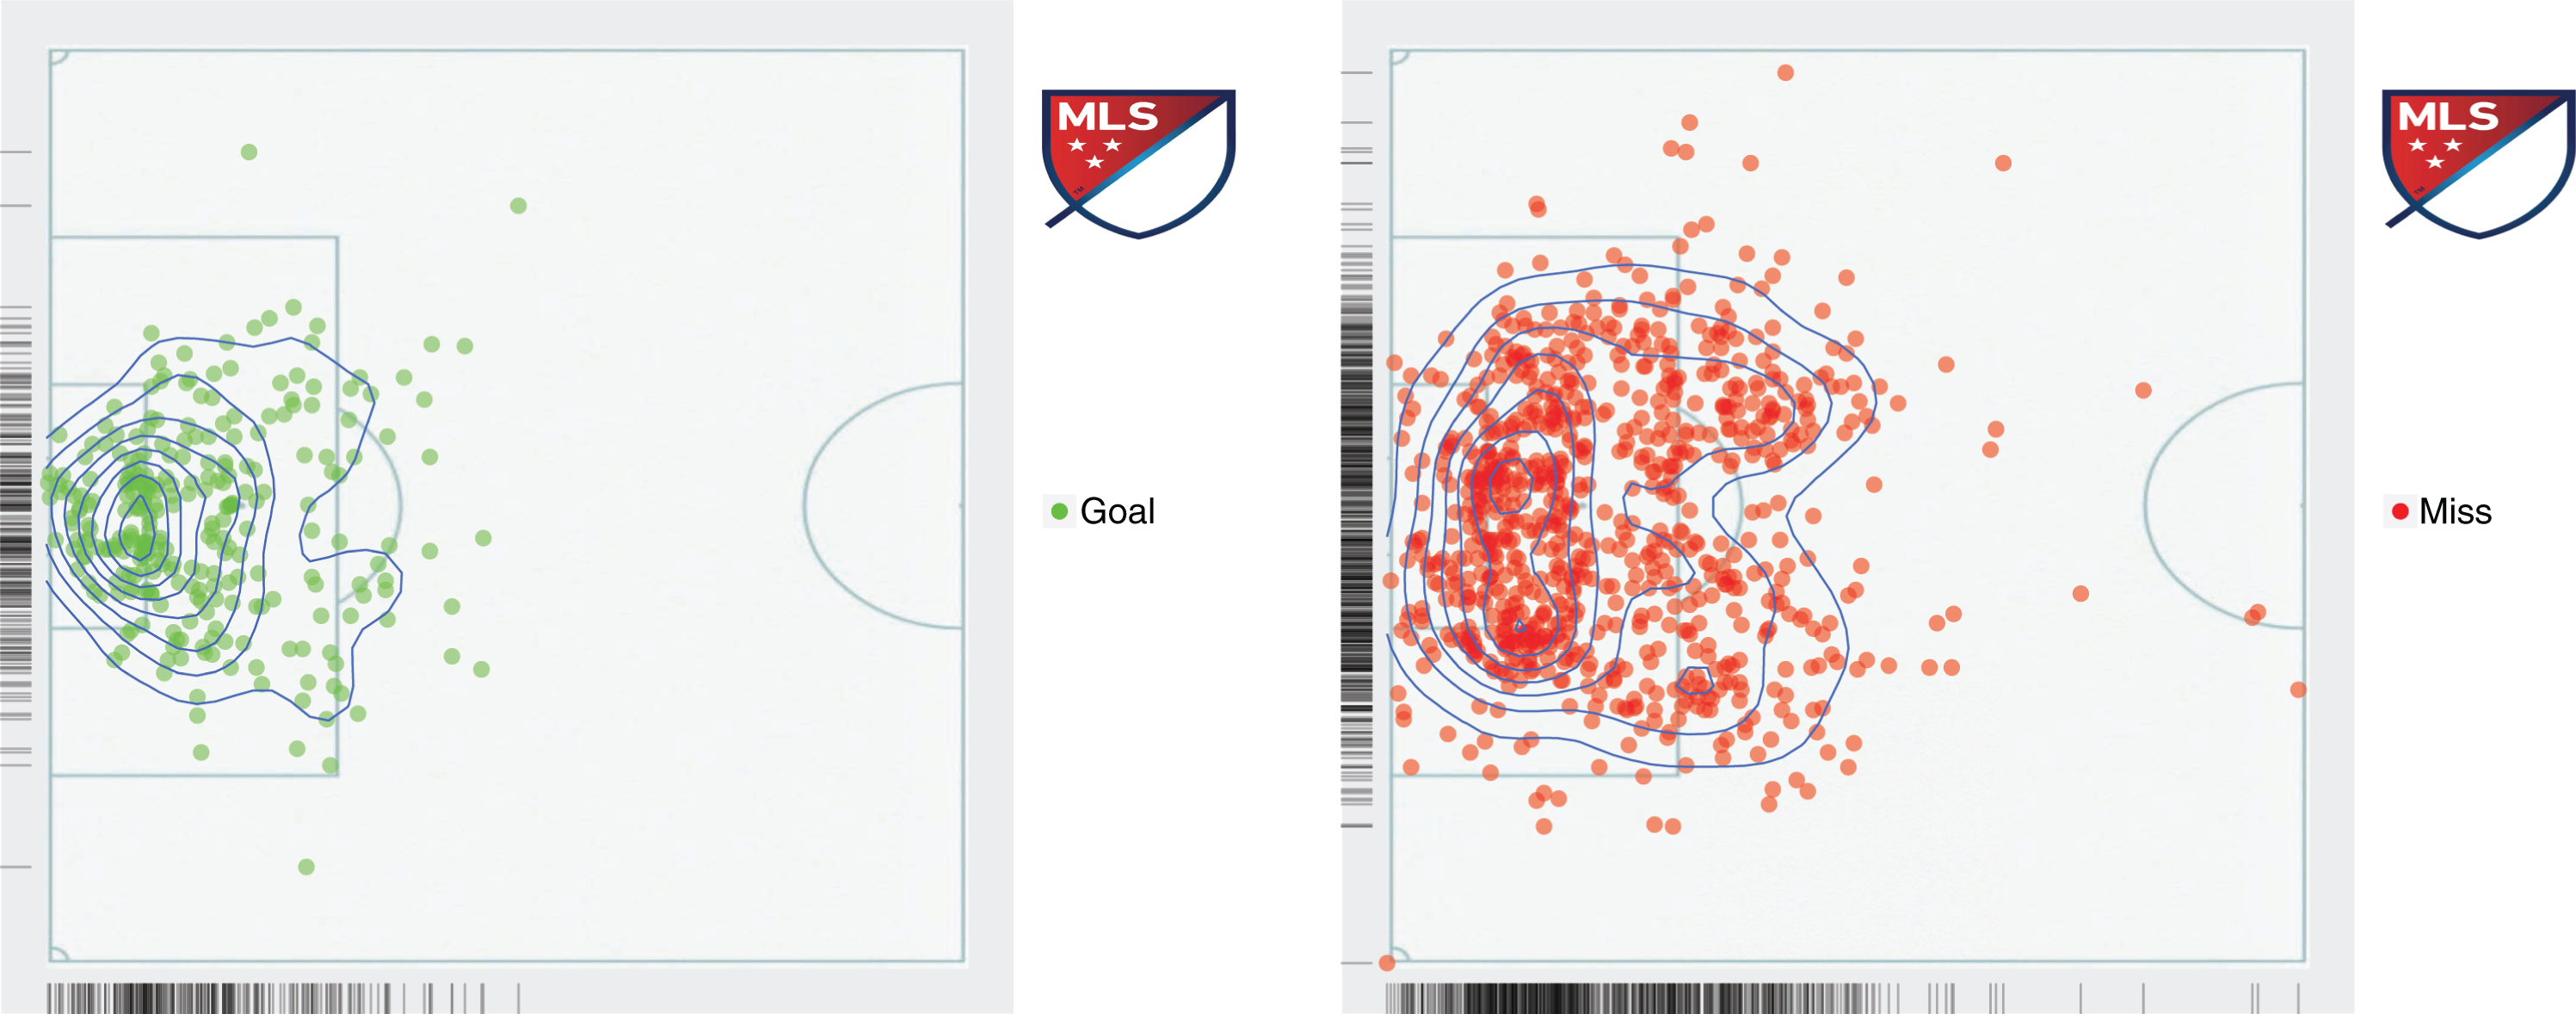 A location density for the shots that resulted in a goal (left figure) and the ones that were misses (right figure).